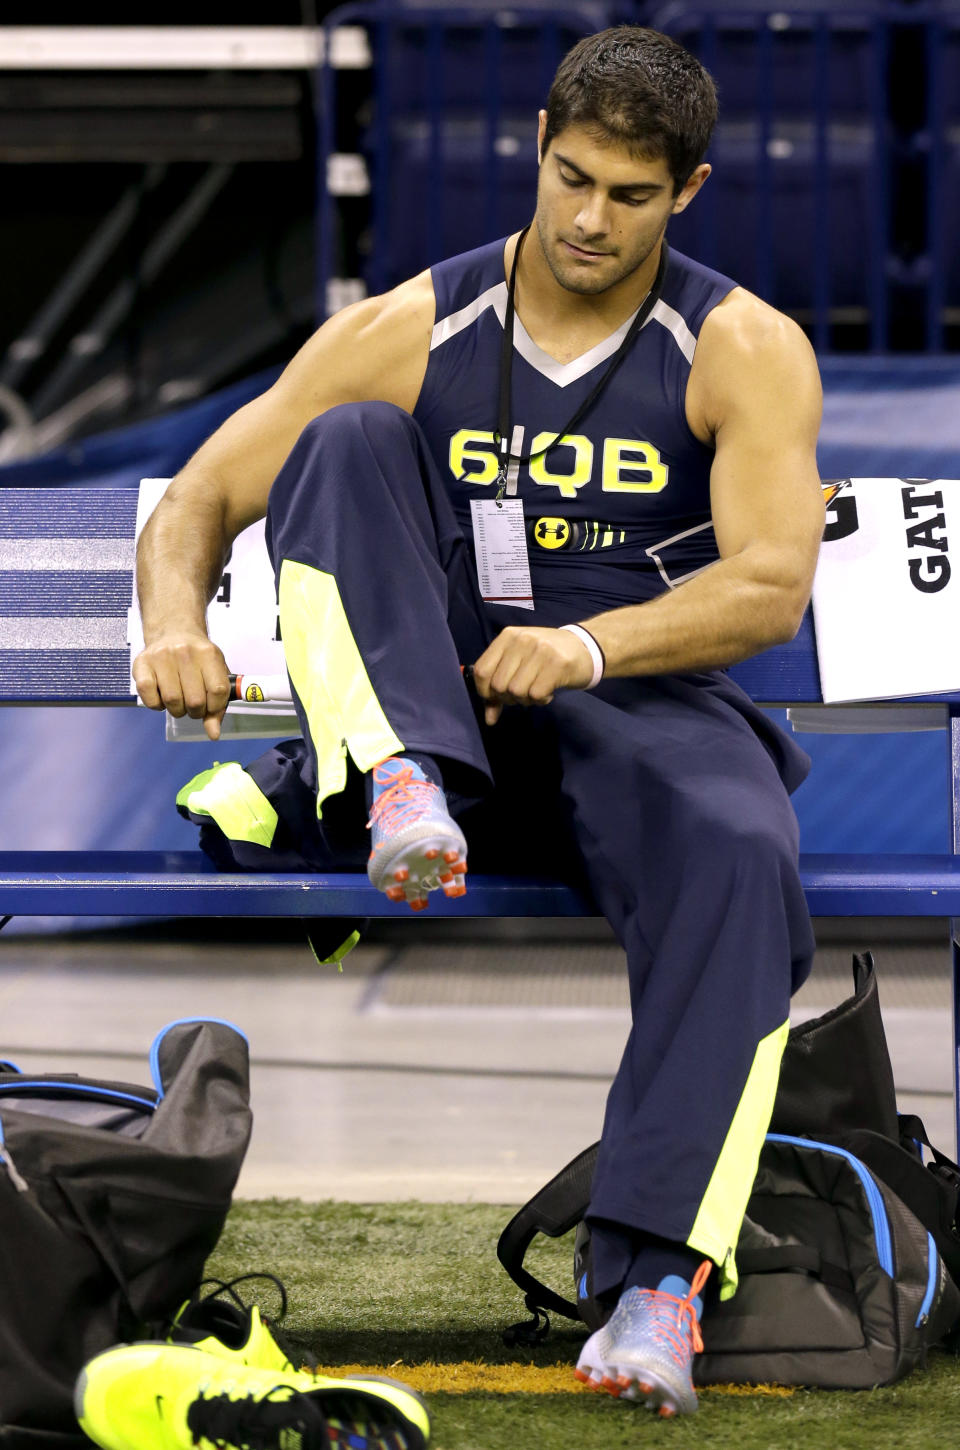 Eastern Illinois quarterback Jimmy Garoppolo sits on the bench before run the 40-yard dash at the NFL football scouting combine in Indianapolis, Sunday, Feb. 23, 2014. (AP Photo/Nam Y. Huh)